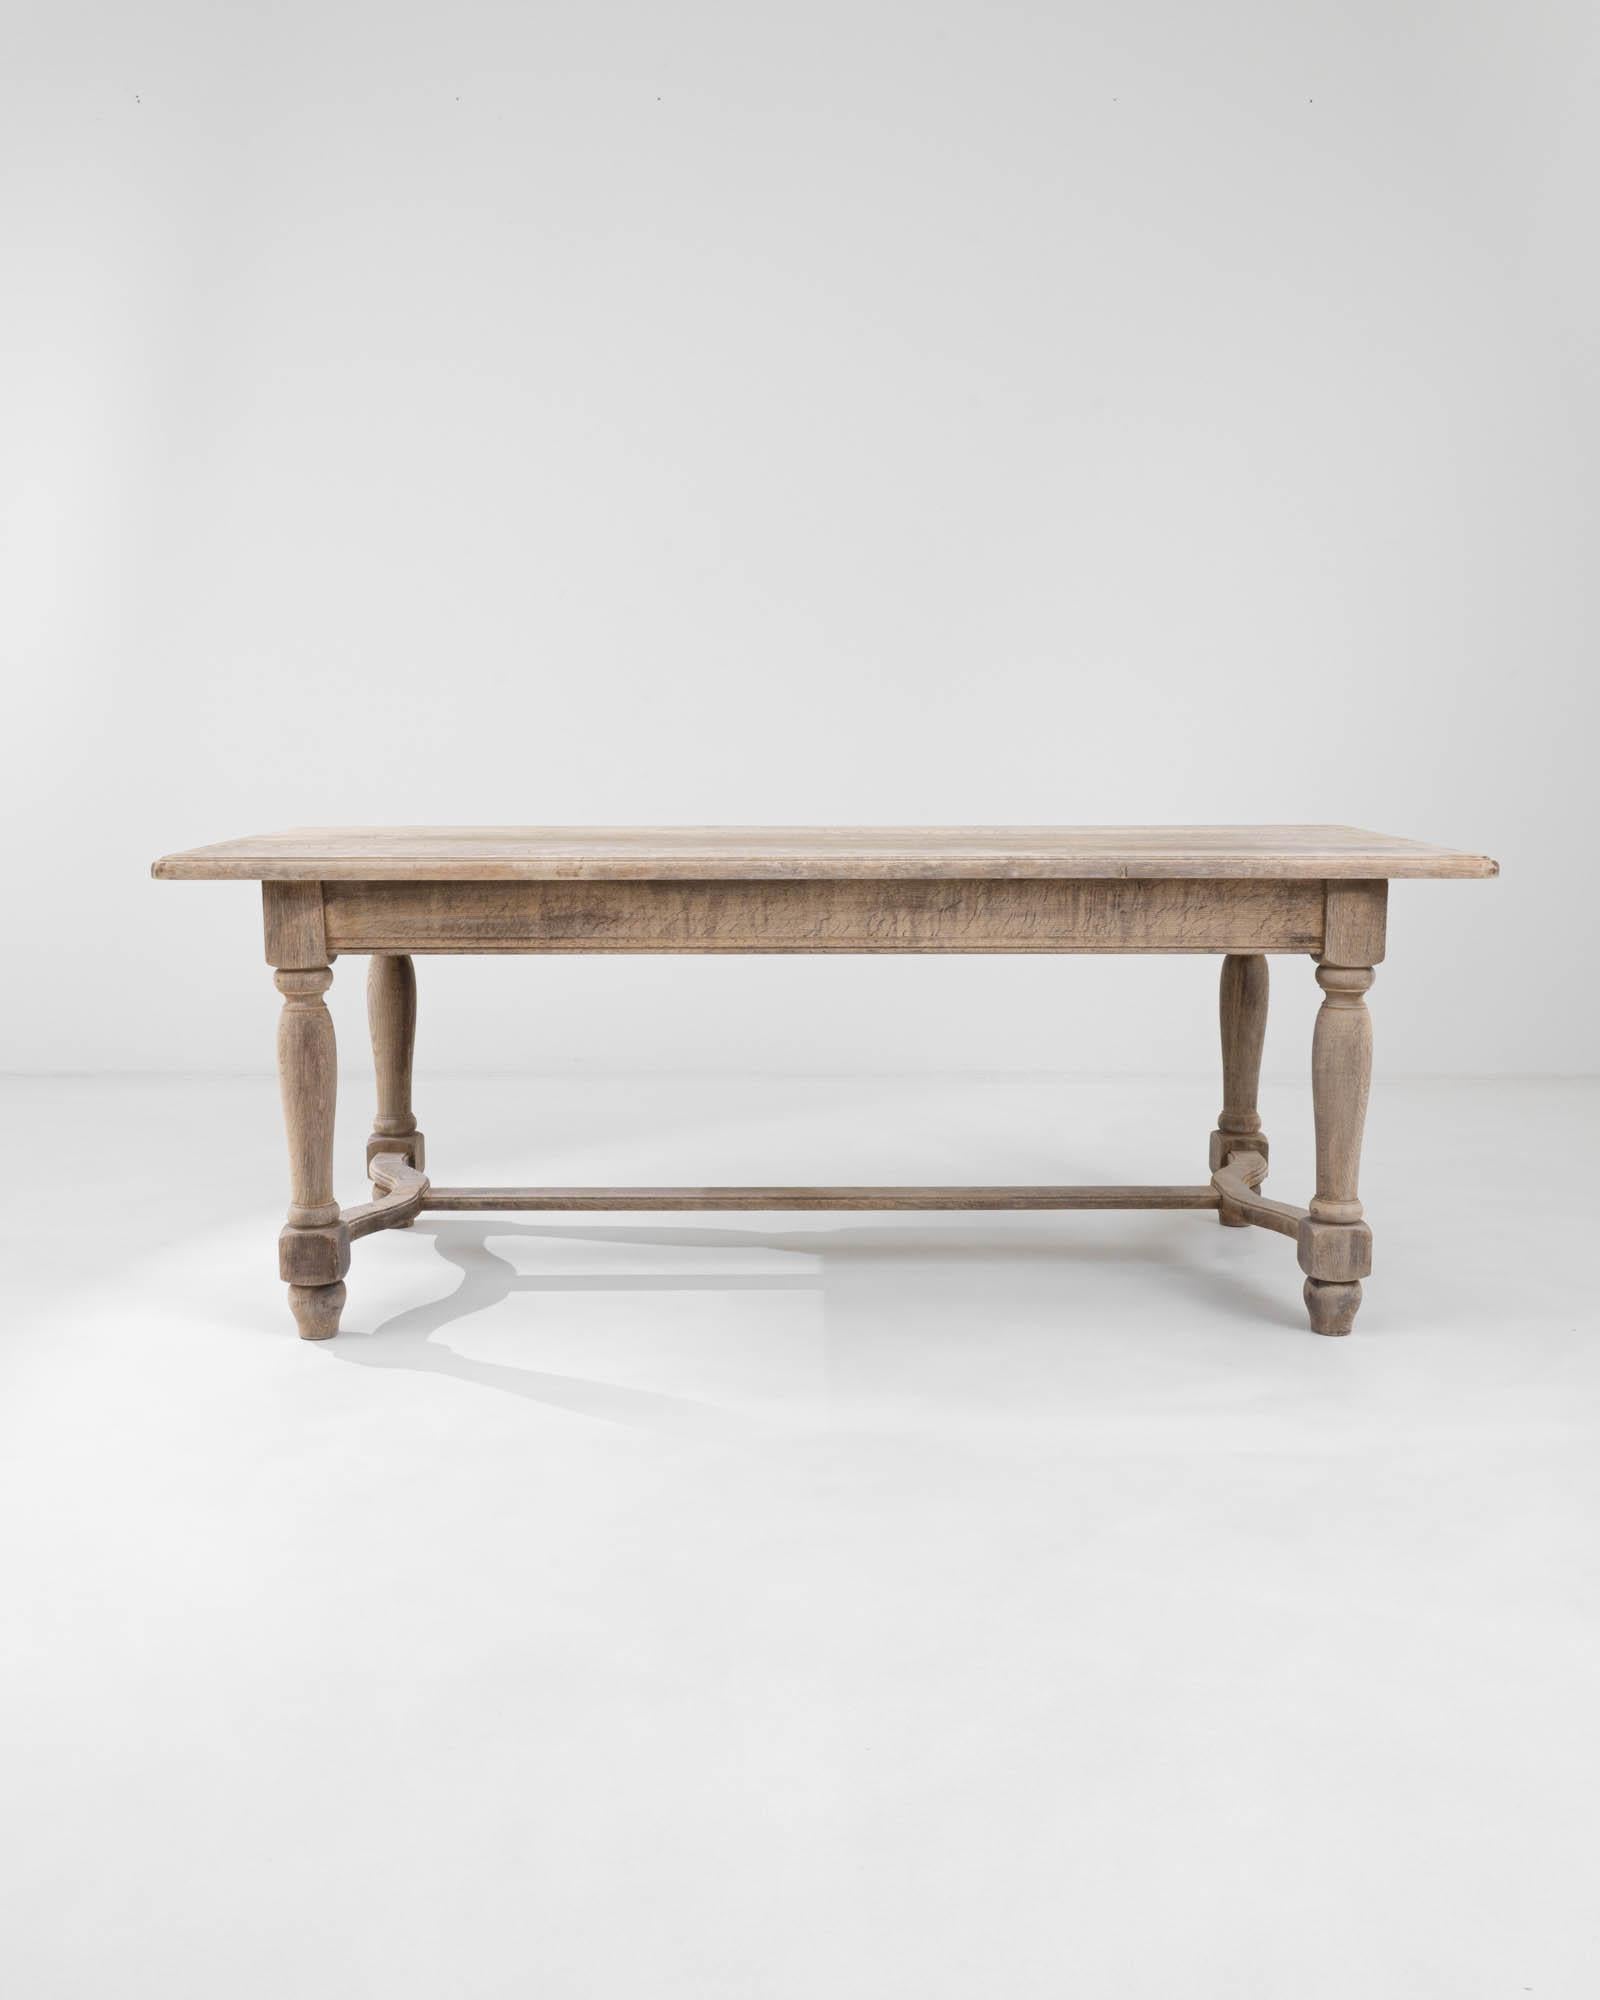 A wooden dining table created in 20th century Belgium. Four gracefully lathed legs descend down from mortise and tenon joints to connect to satisfyingly curved stretchers, creating a classic trestle style dining table. Veins of wood grain run across